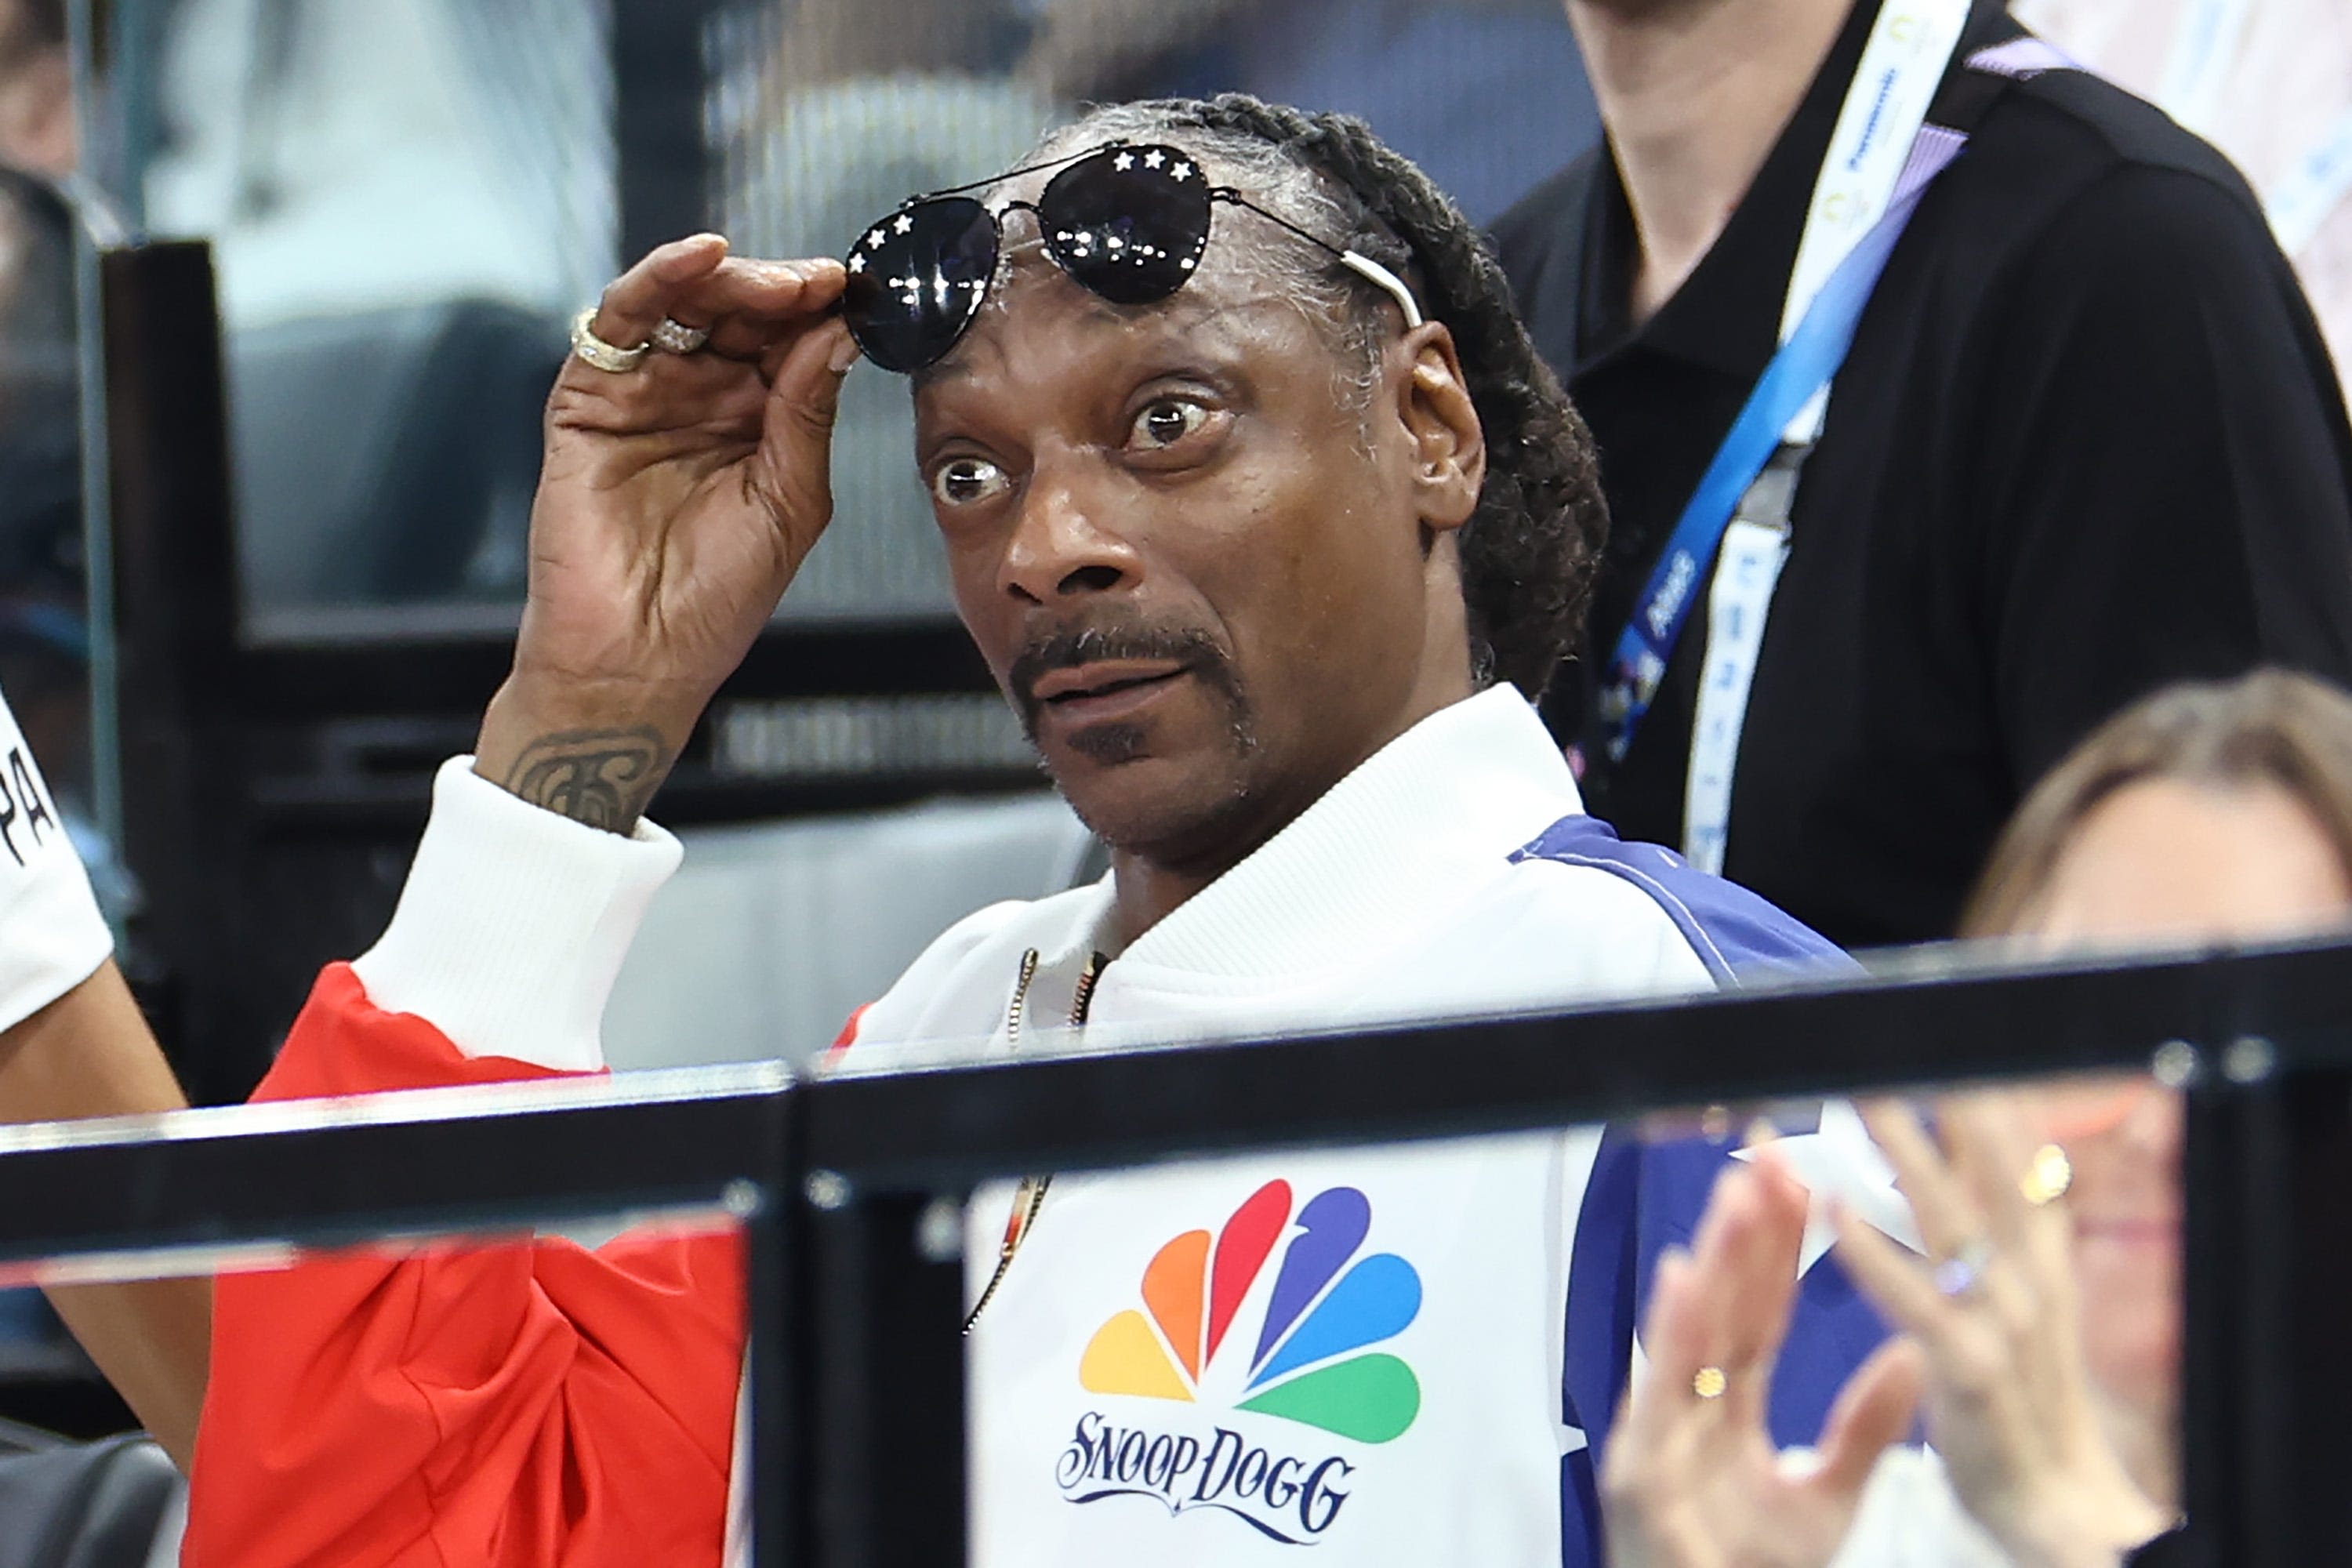 Snoop Dogg described a badminton rally with a smoothness that only he could possibly achieve